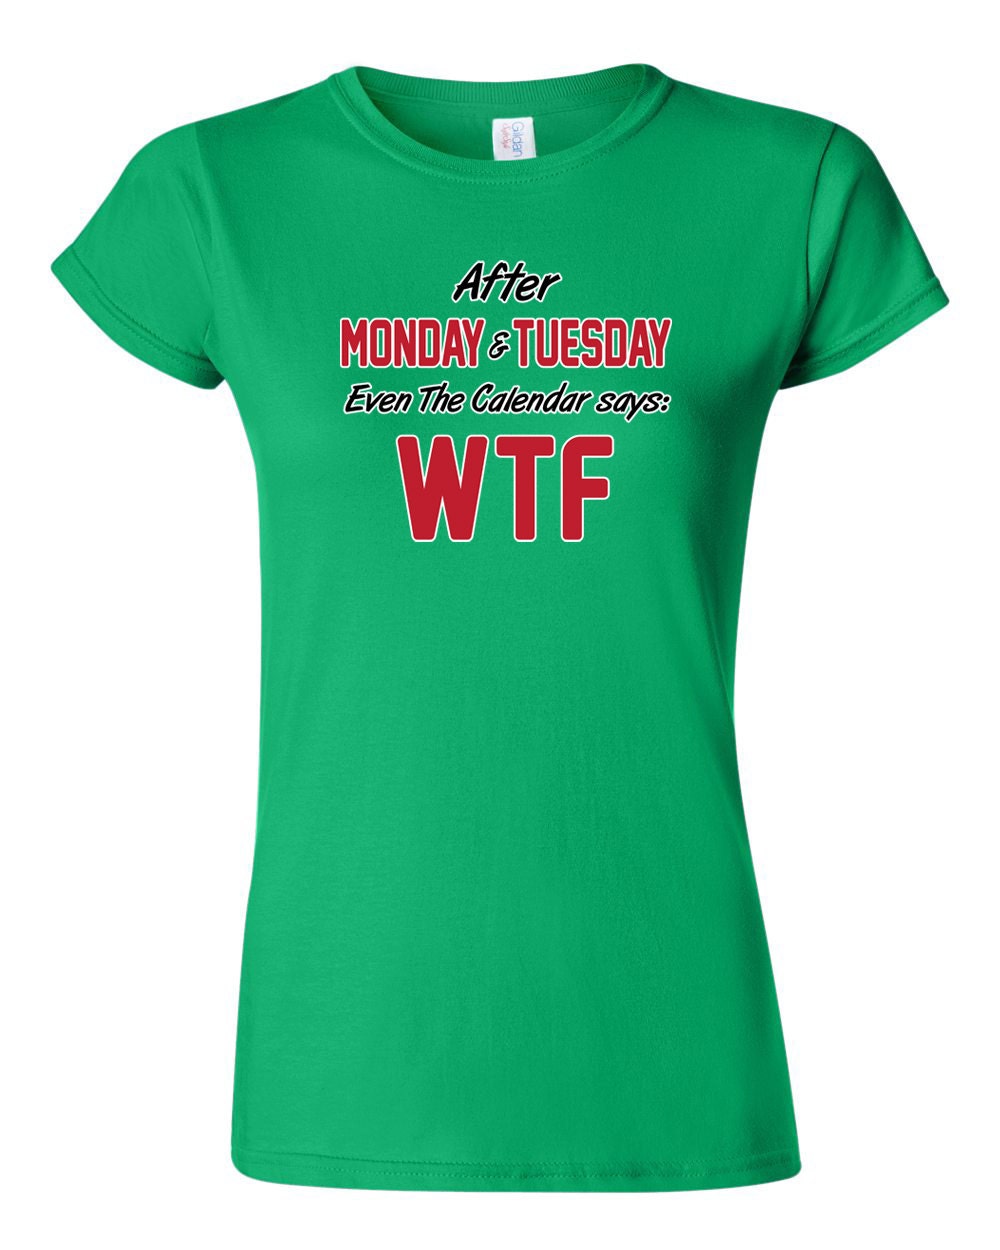 City Shirts Junior Monday Tuesday WTF Funny Humor Novelty DT T-Shirt Tee 1184